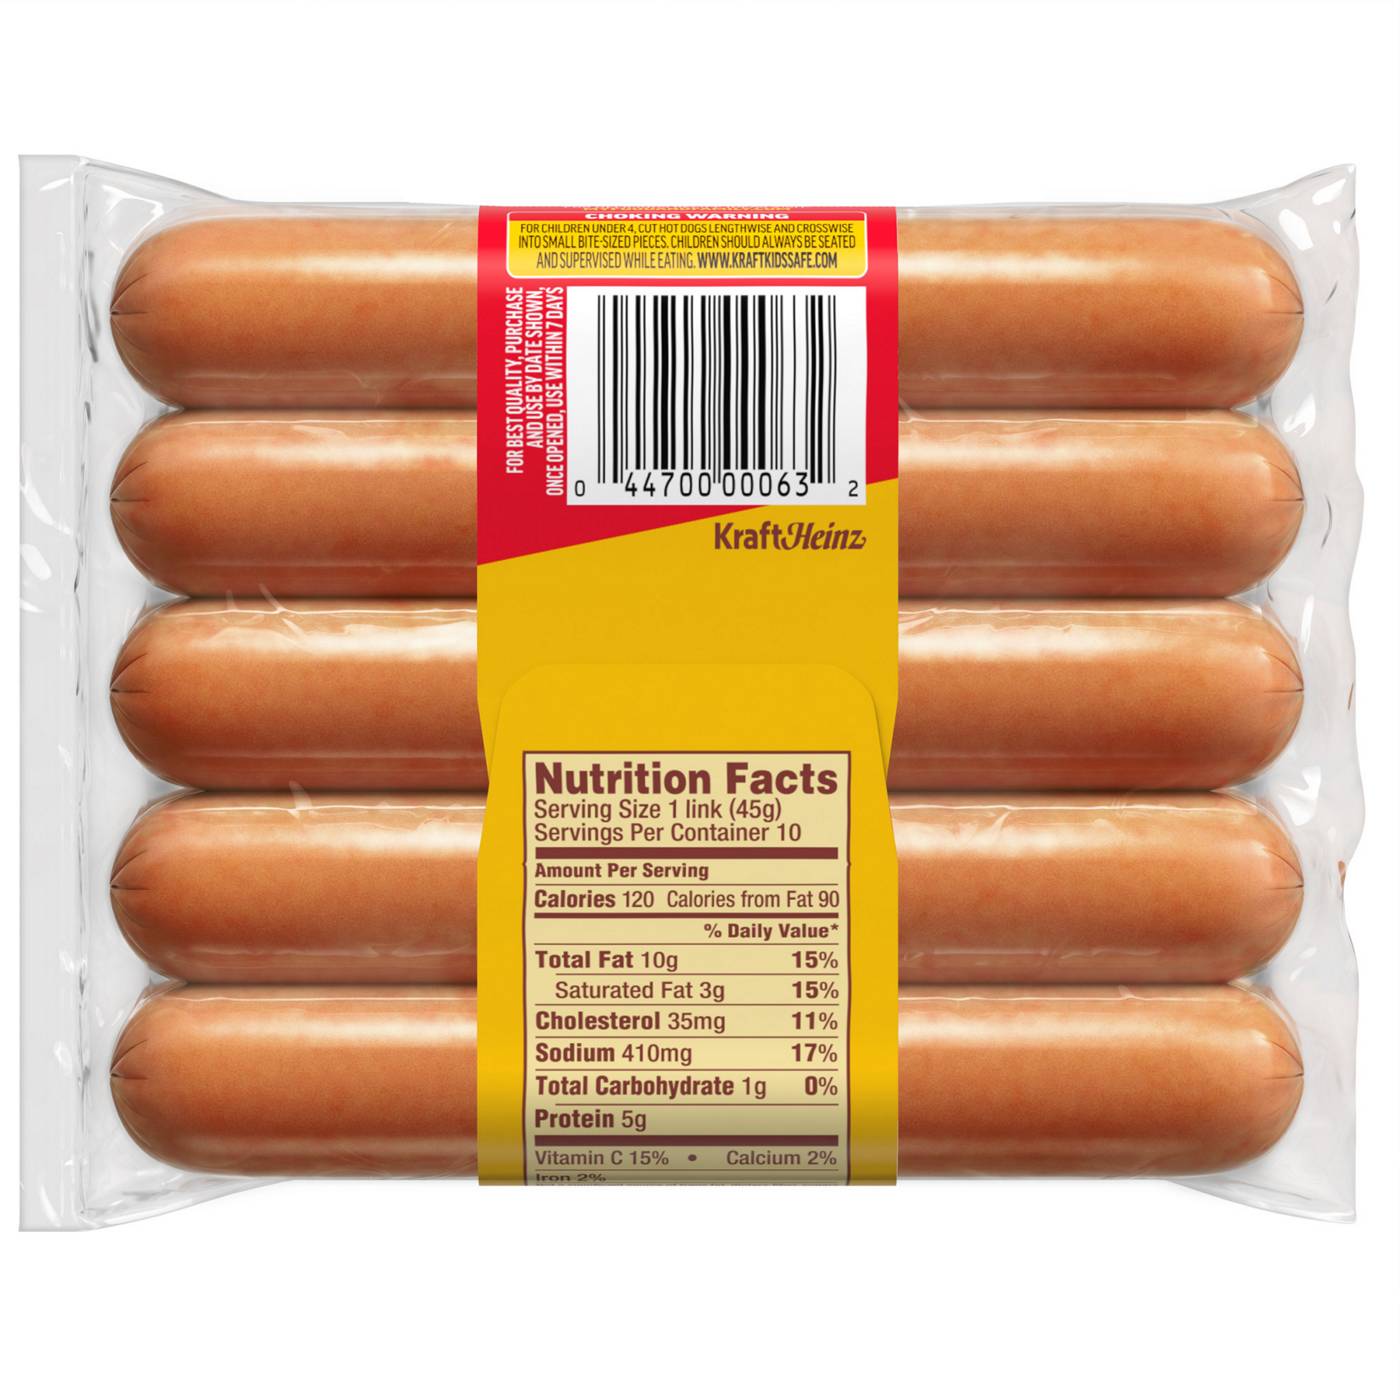 Oscar Mayer Classic Uncured Wieners Hot Dogs; image 7 of 7